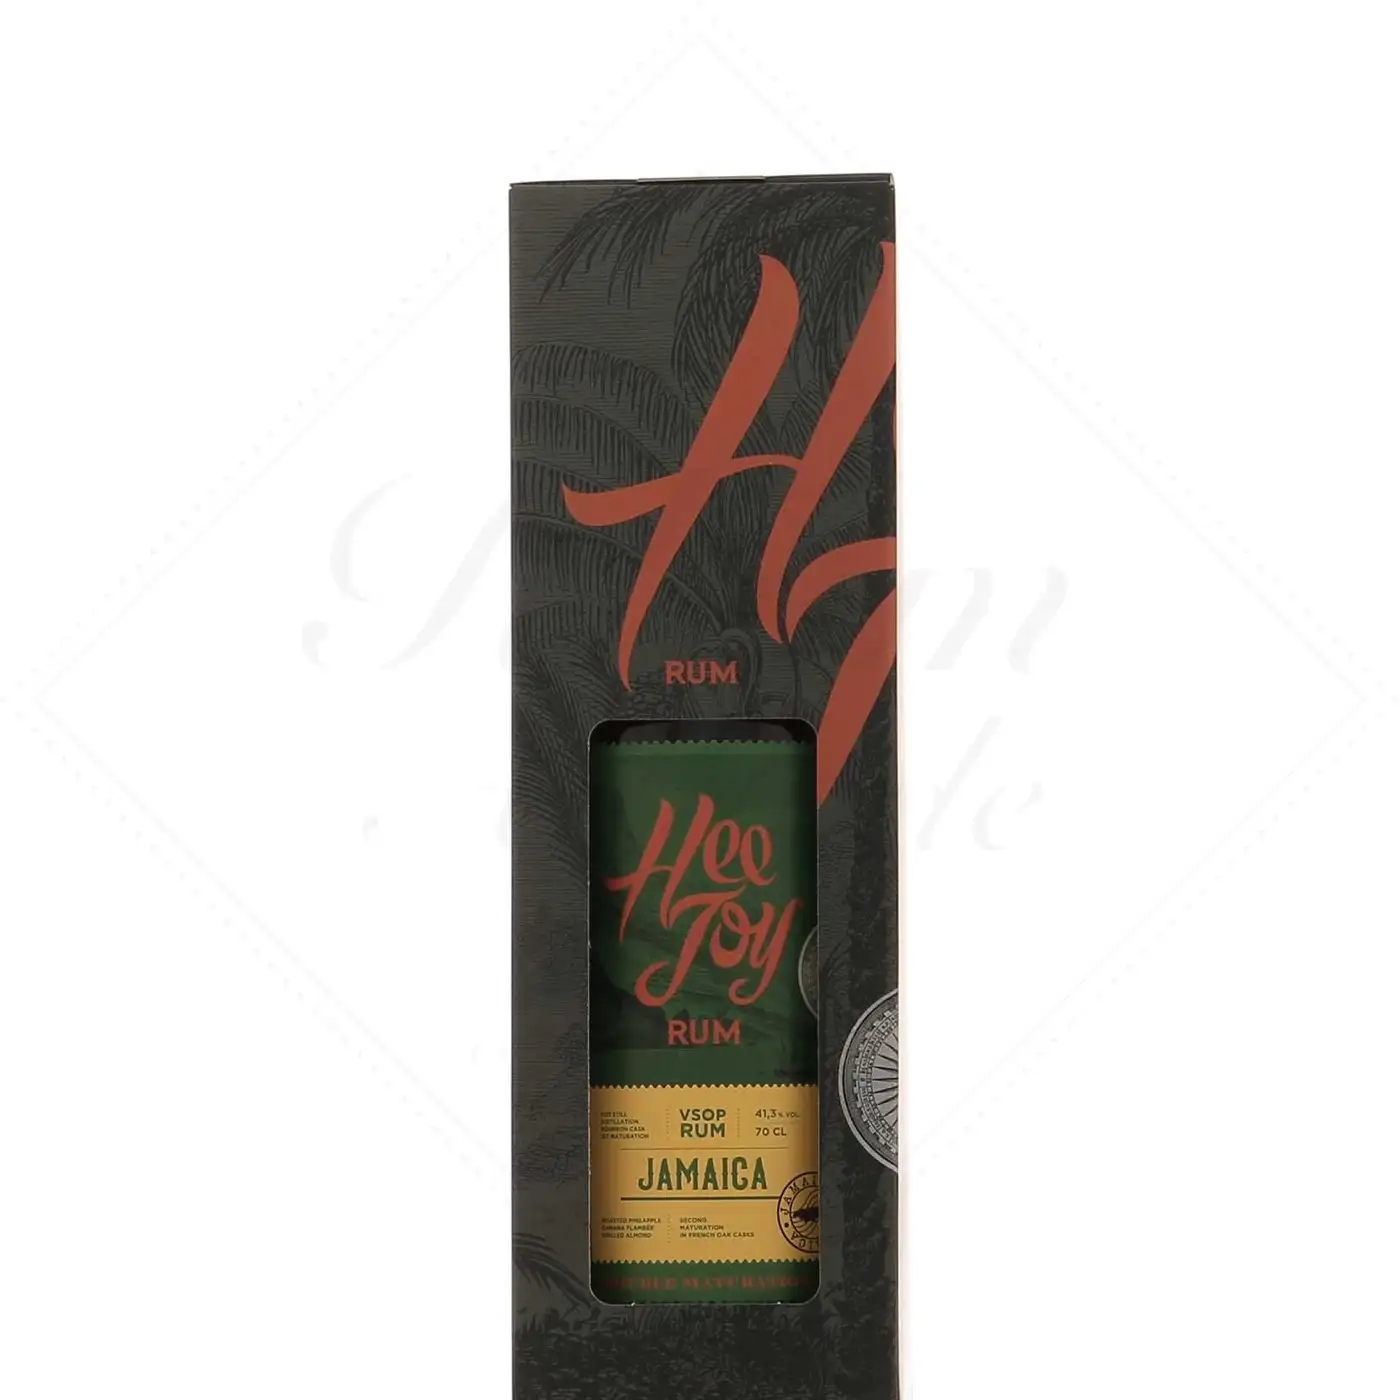 Image of the front of the bottle of the rum Hee Joy VSOP